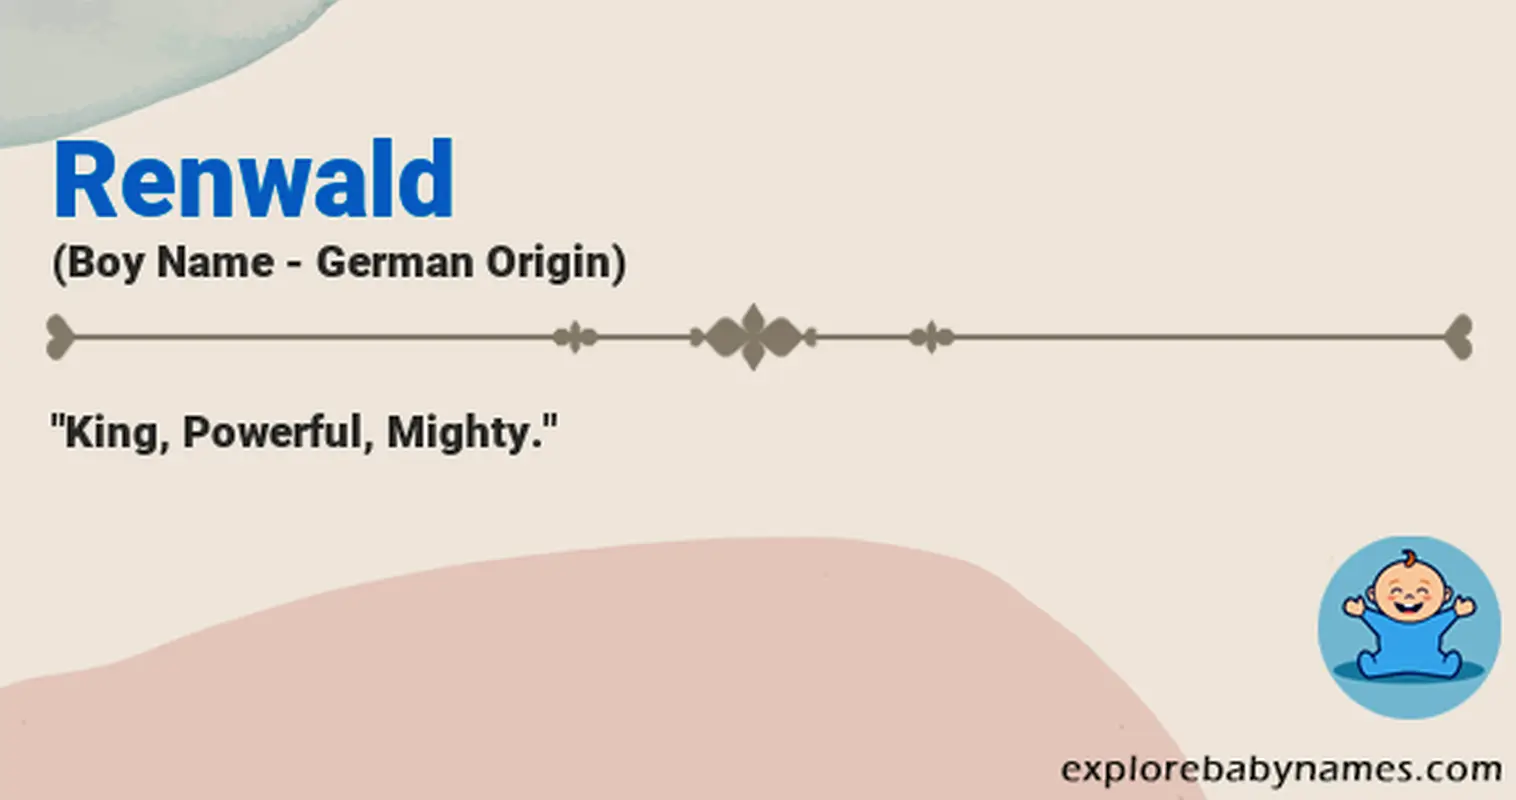 Meaning of Renwald